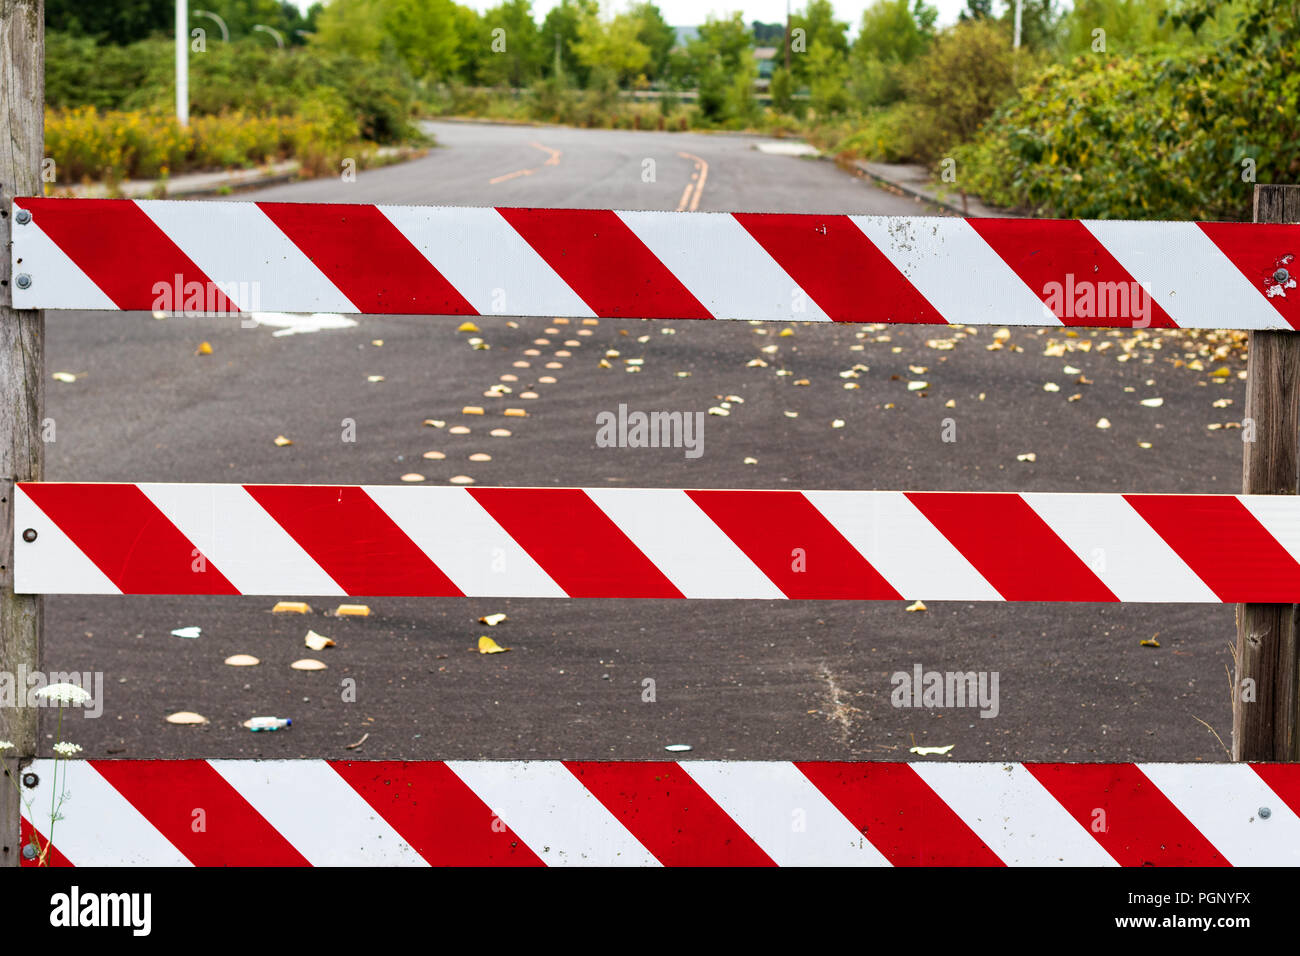 Road block barricade sign stripes white and red with road behind Stock Photo